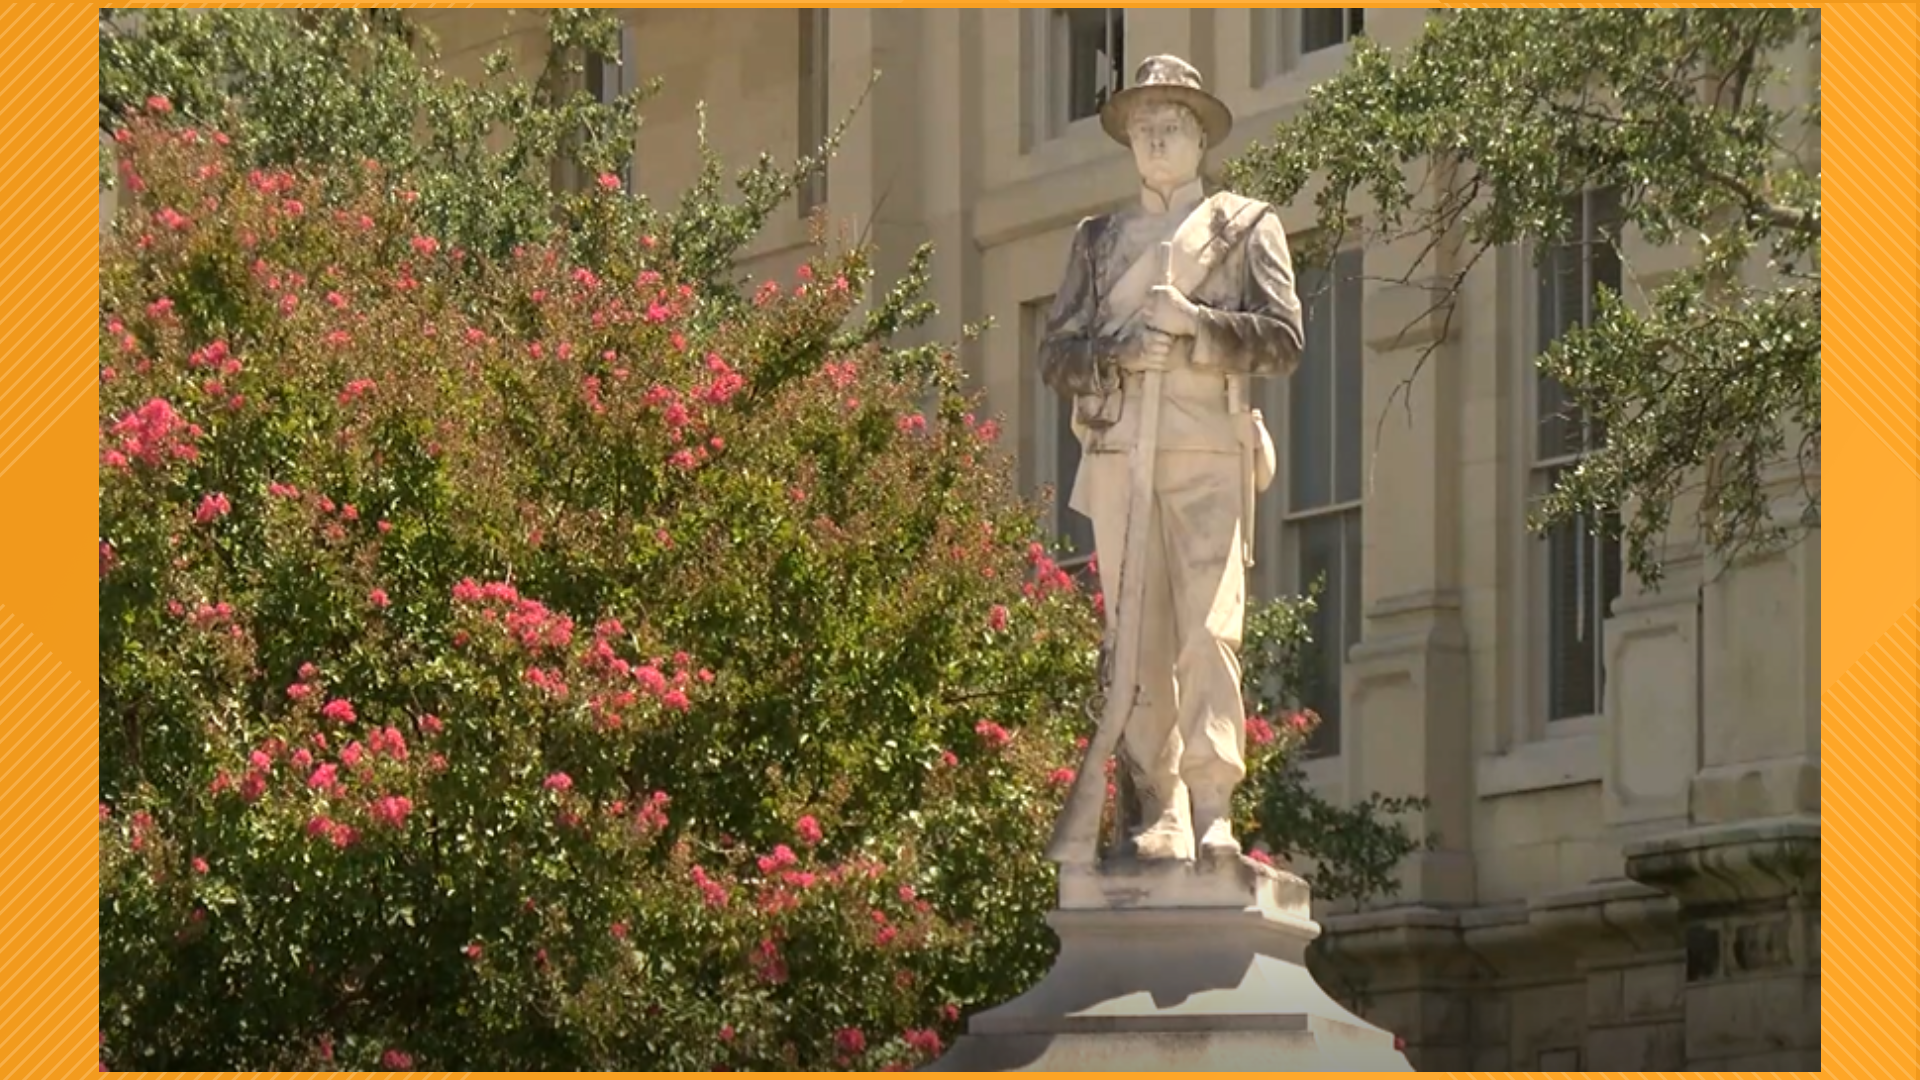 The Bell County Commissioners met Monday afternoon to discuss whether or not to remove the Confederate monument on the Bell County Courthouse lawn.